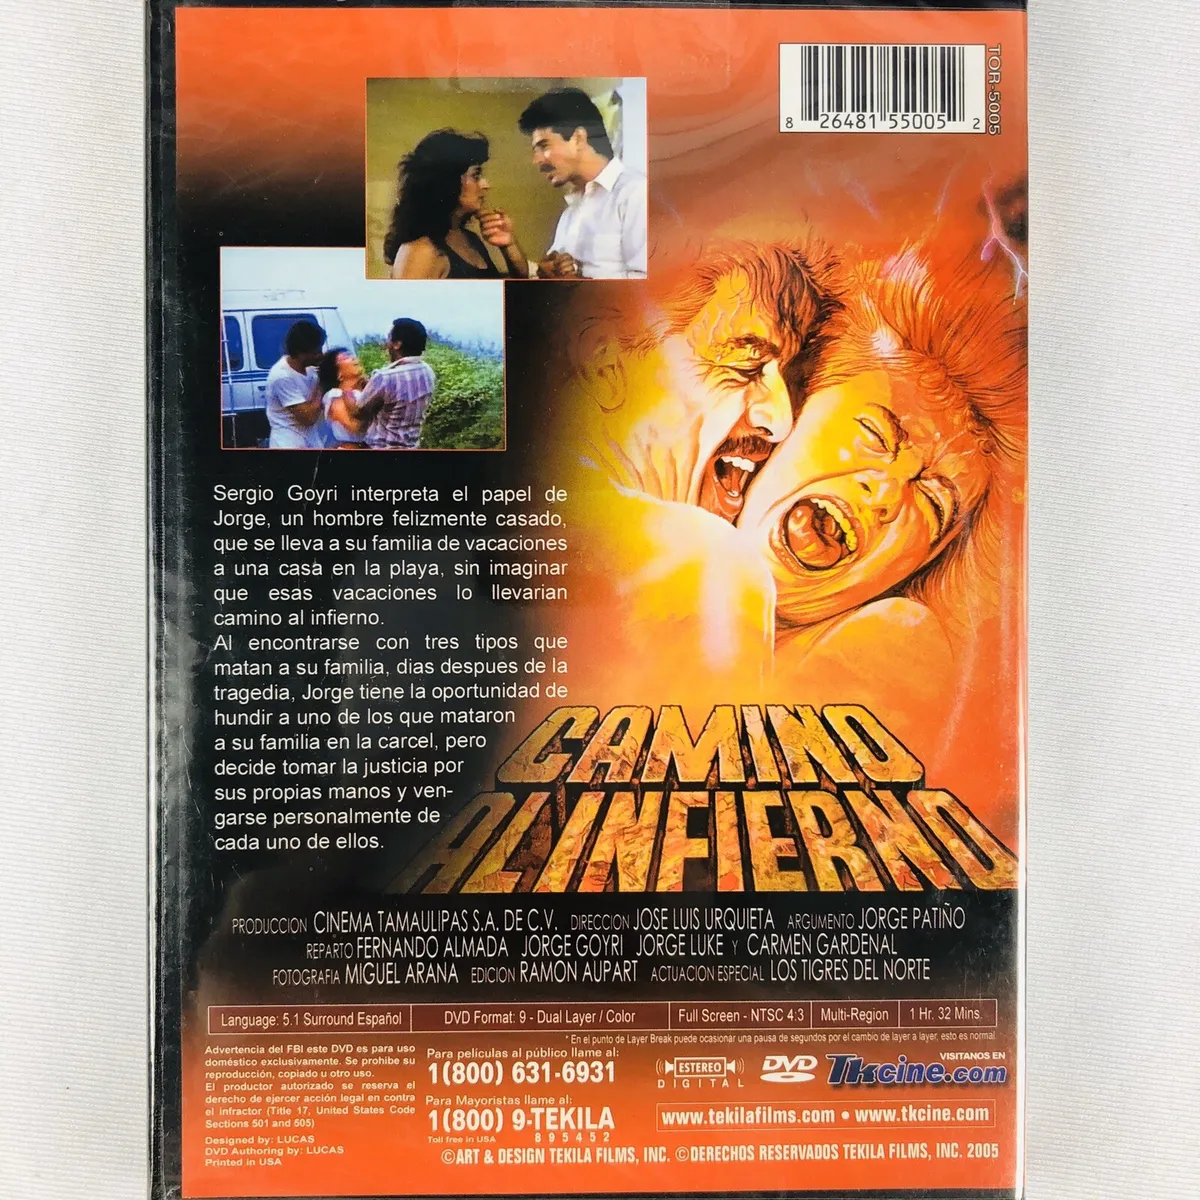 avila tan recommends el infierno movie download pic